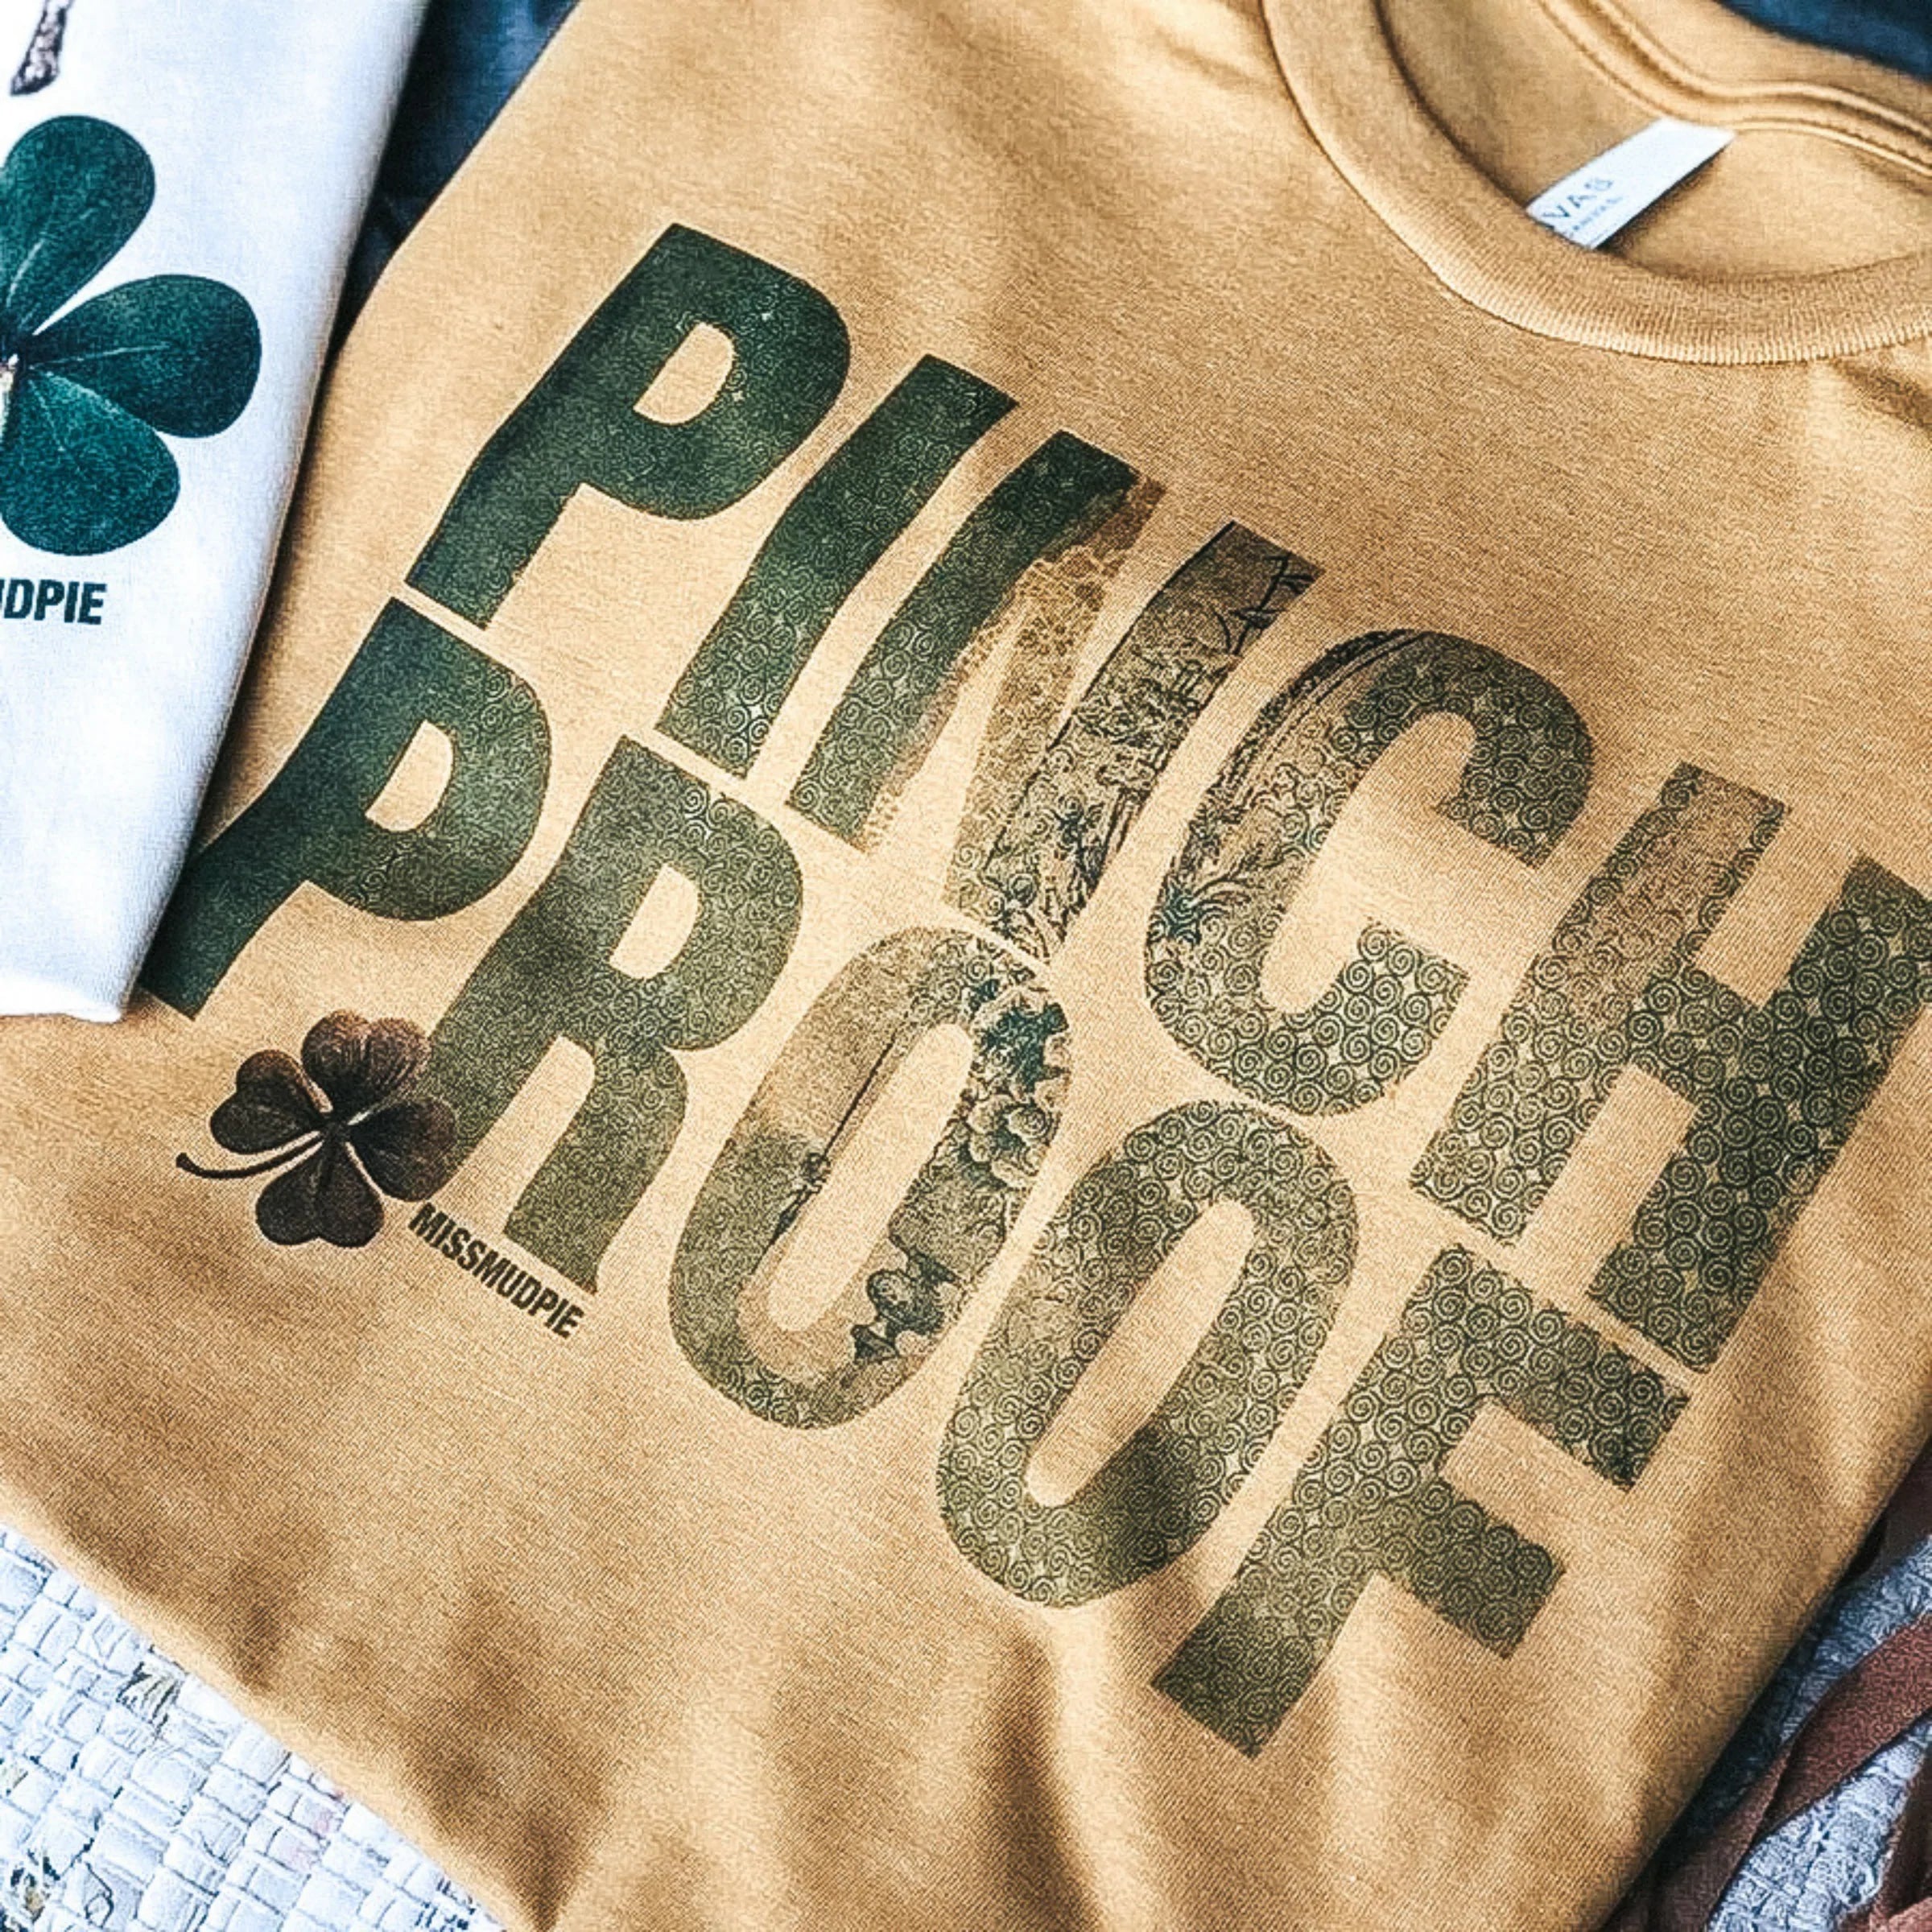 An army green colored tee shirt folded exposing the graphic that says "Pinch Proof" in olive green.